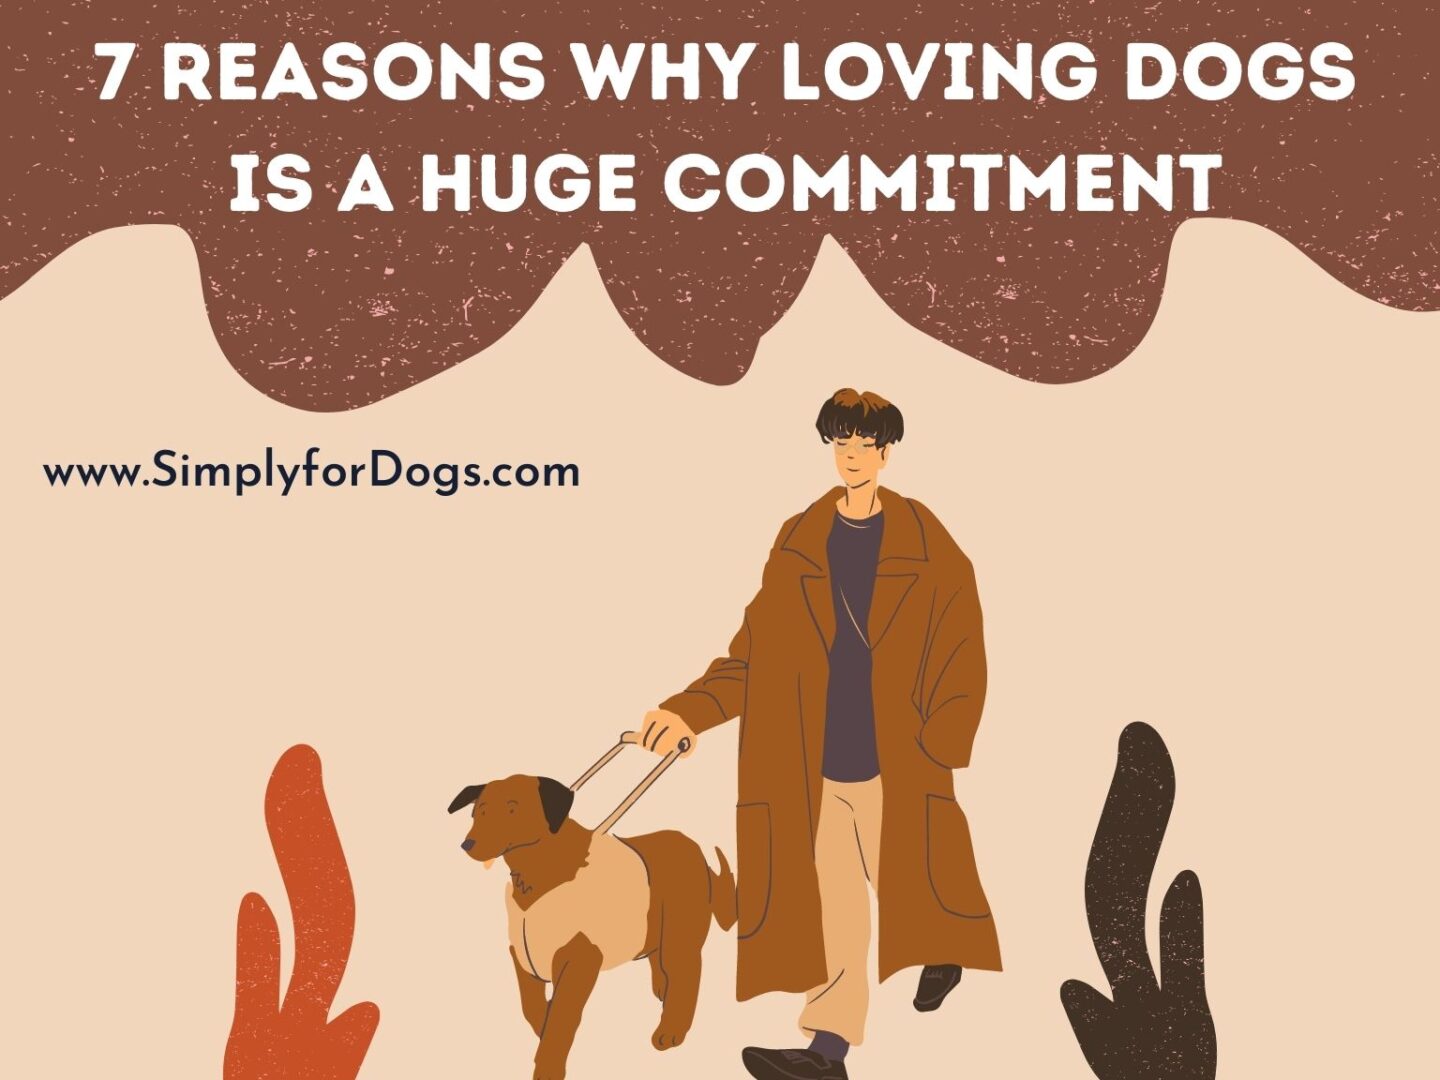 7 Reasons Why Loving Dogs Is a Huge Commitment